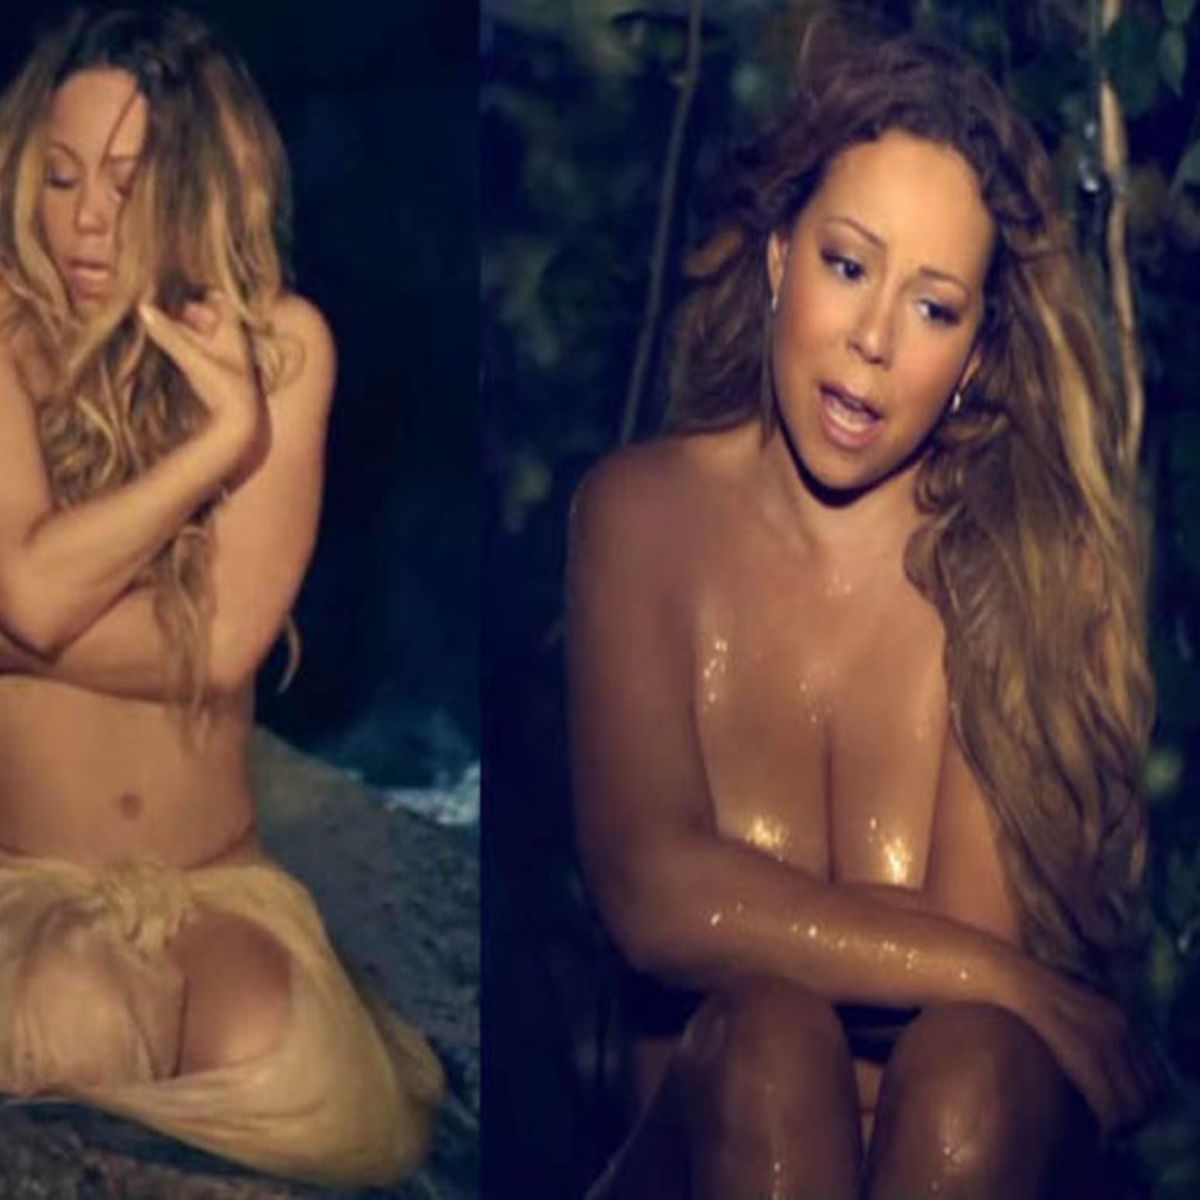 becky sain recommends mariah carey half naked pic